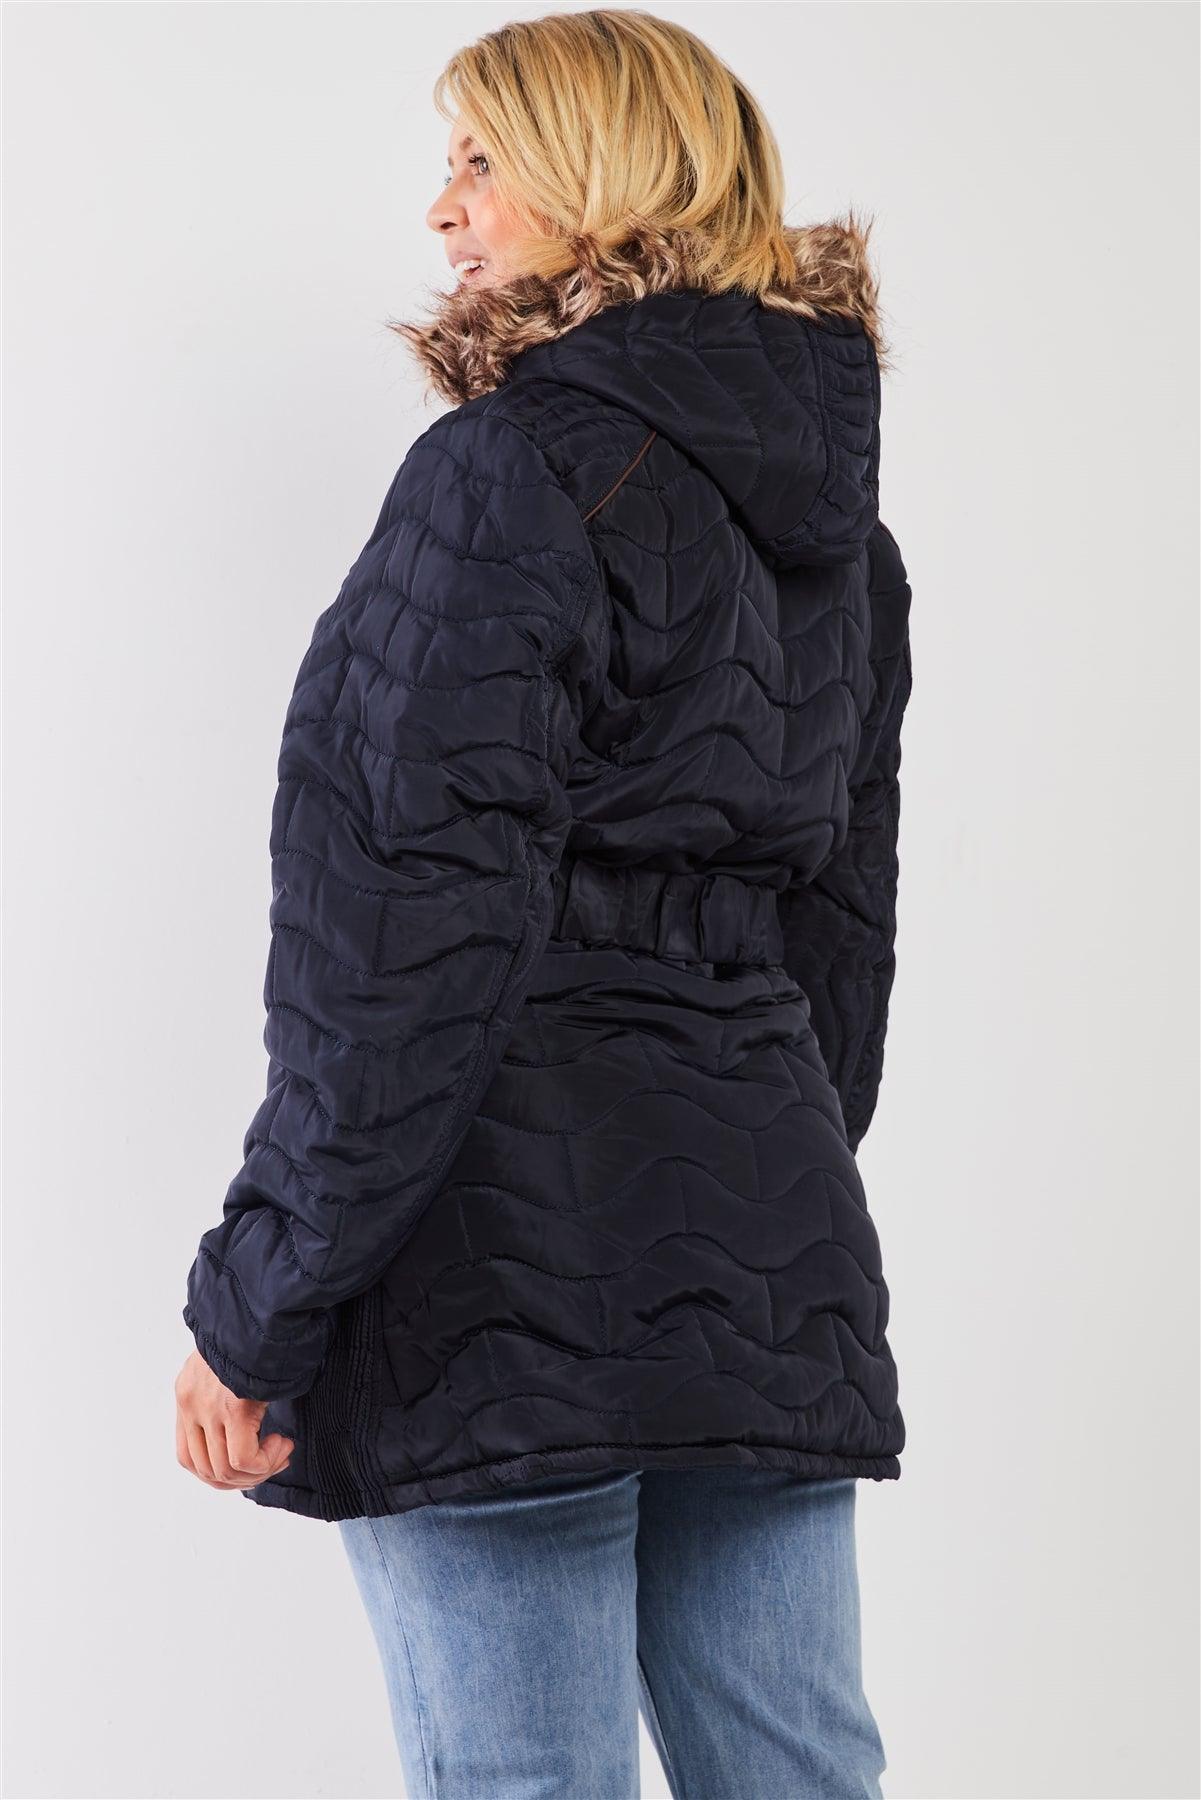 Junior Plus Navy Wavy Brick Quilt Faux Fur Hood Belted Padded Long Puffer Jacket /1-1-1-1